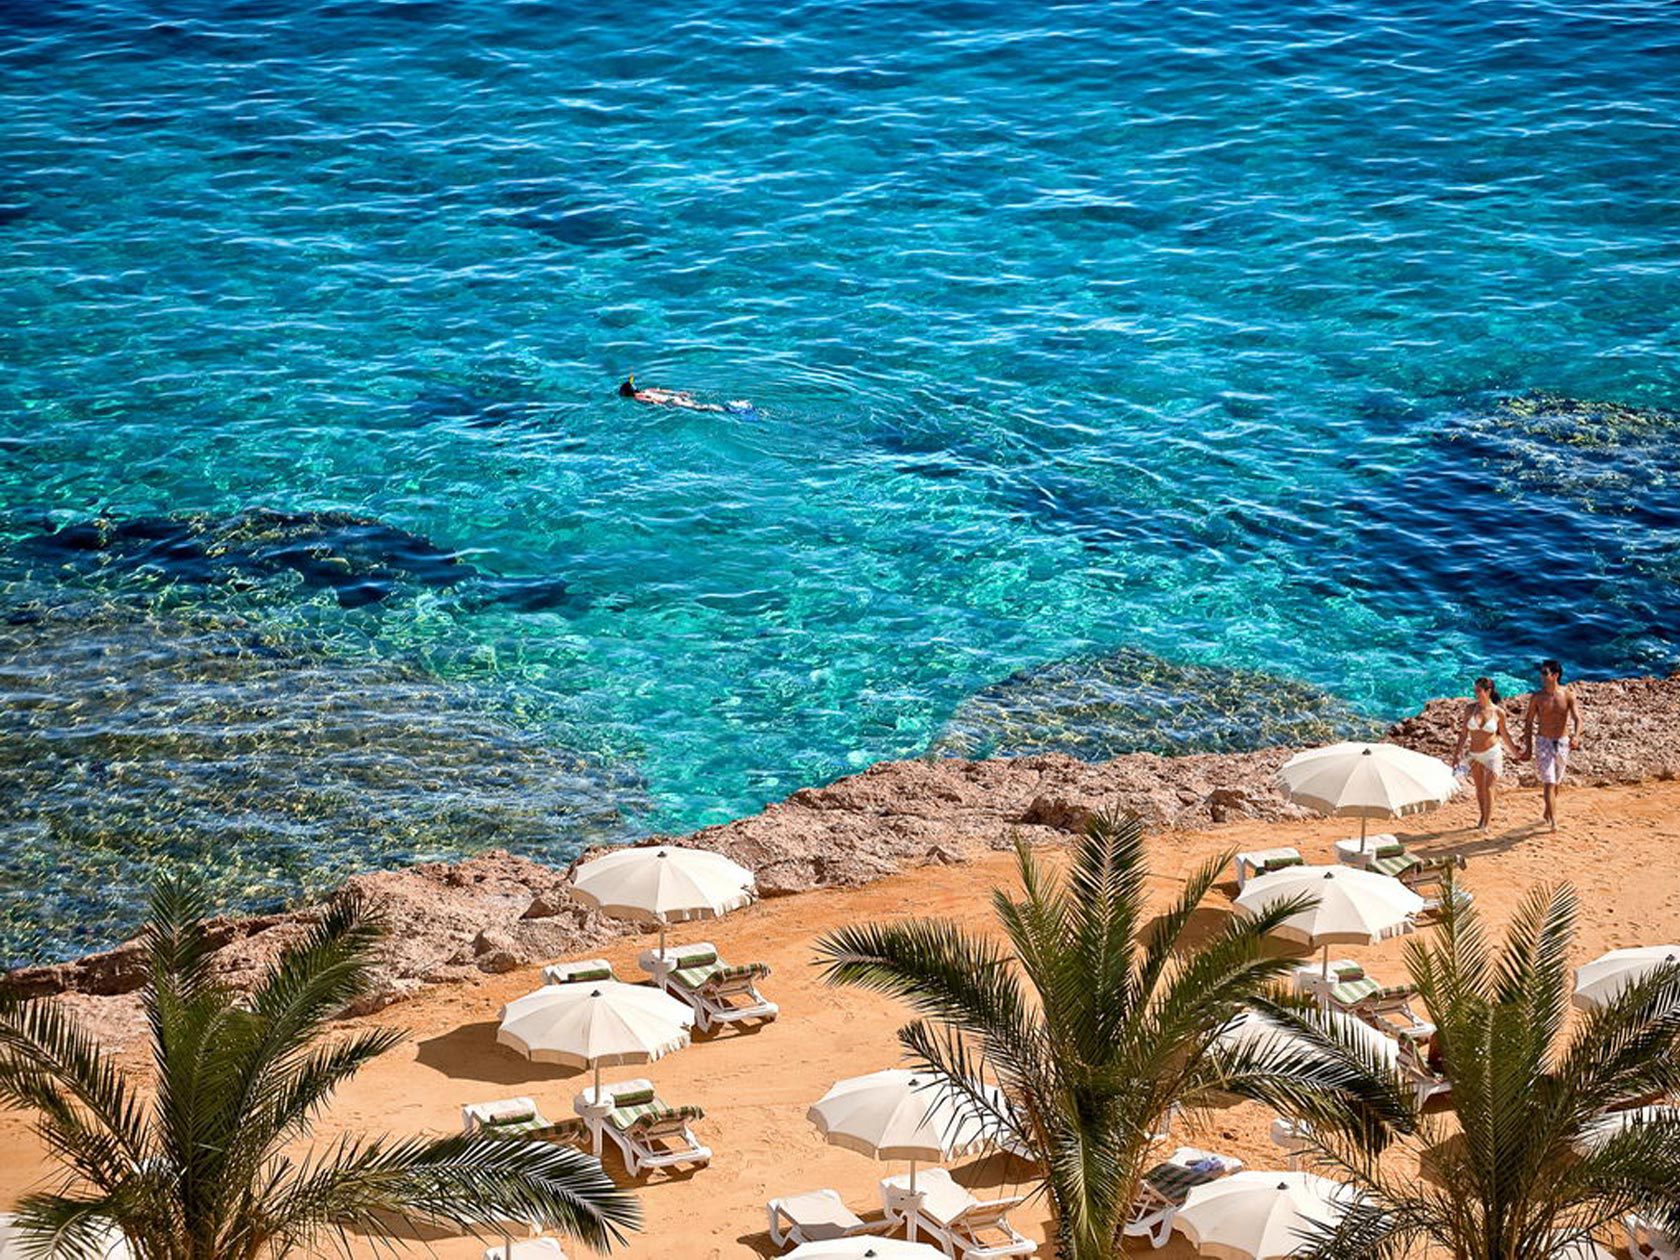 World___Egypt_Winter_holiday_on_the_beach_in_the_resort_of_Hurghada__Egypt_066386_